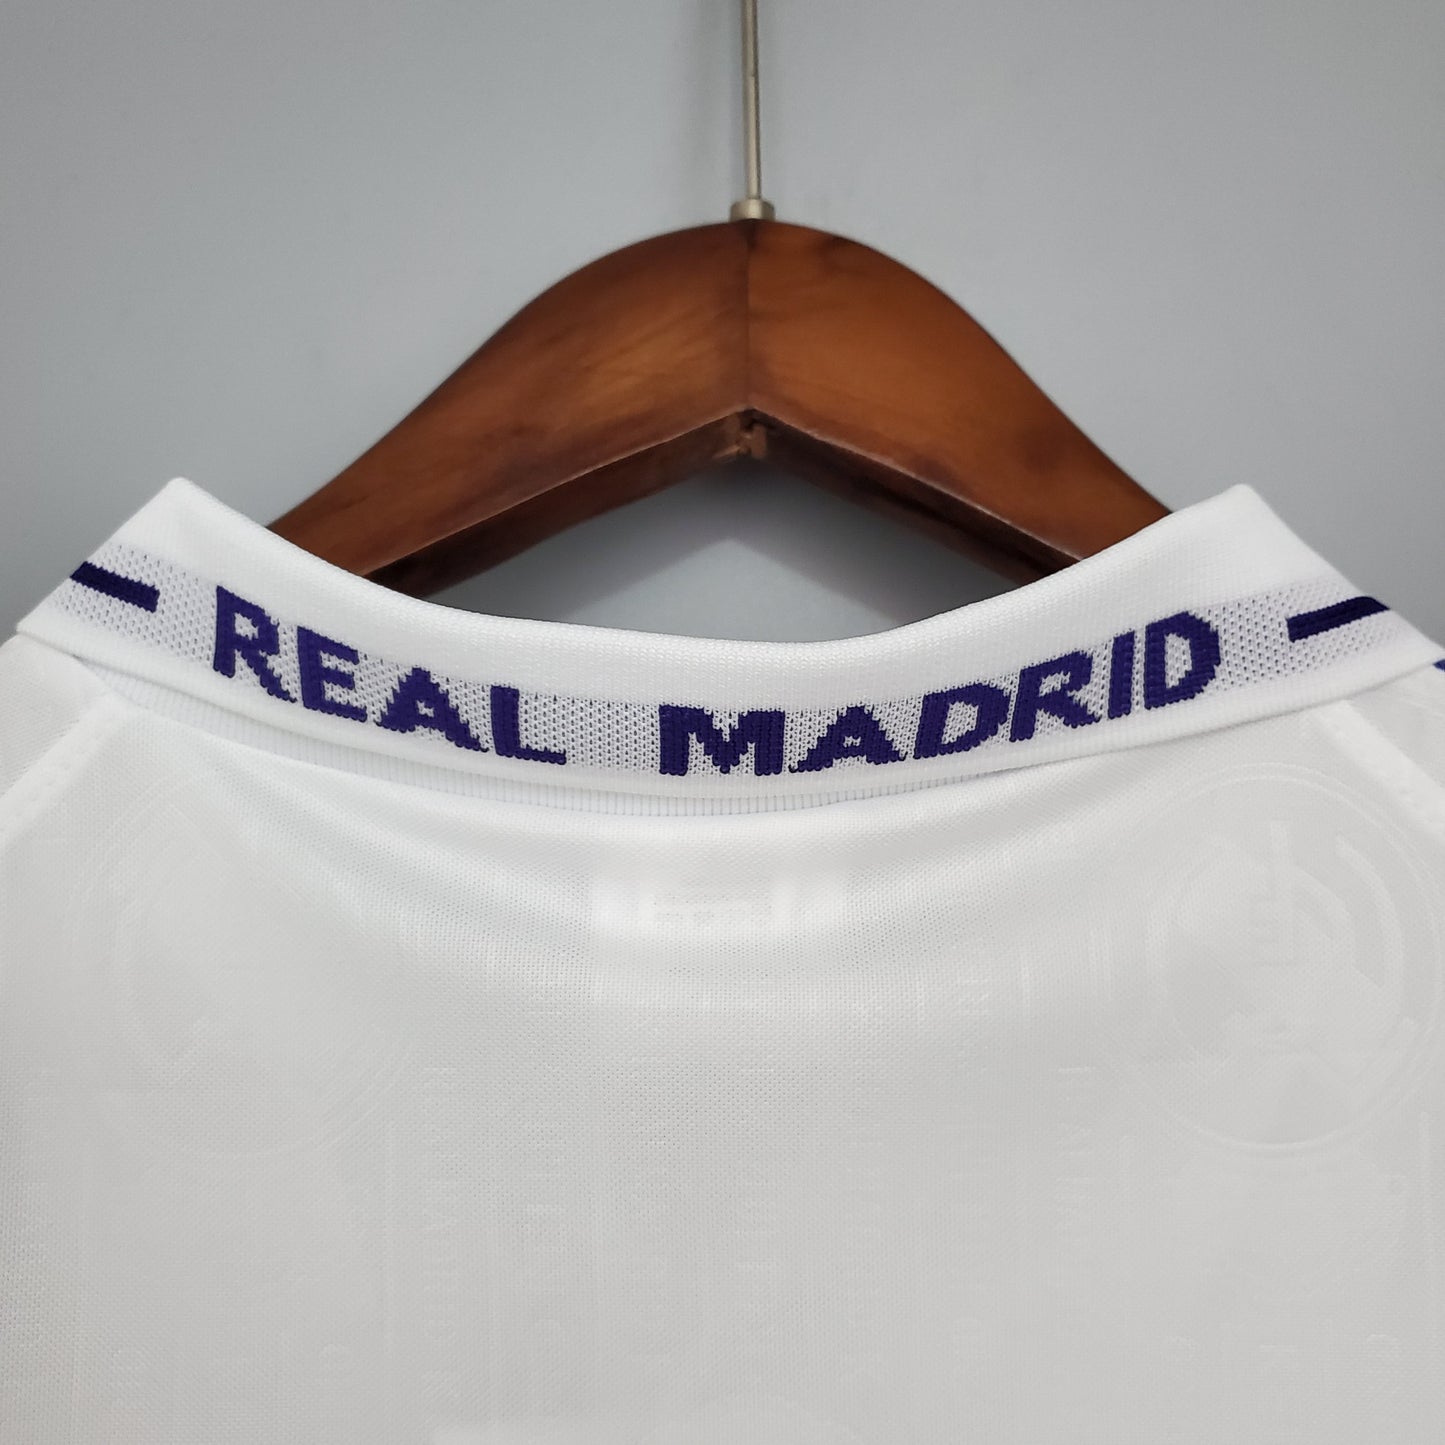 REAL MADRID 1996 - 1997 HOME JERSEY